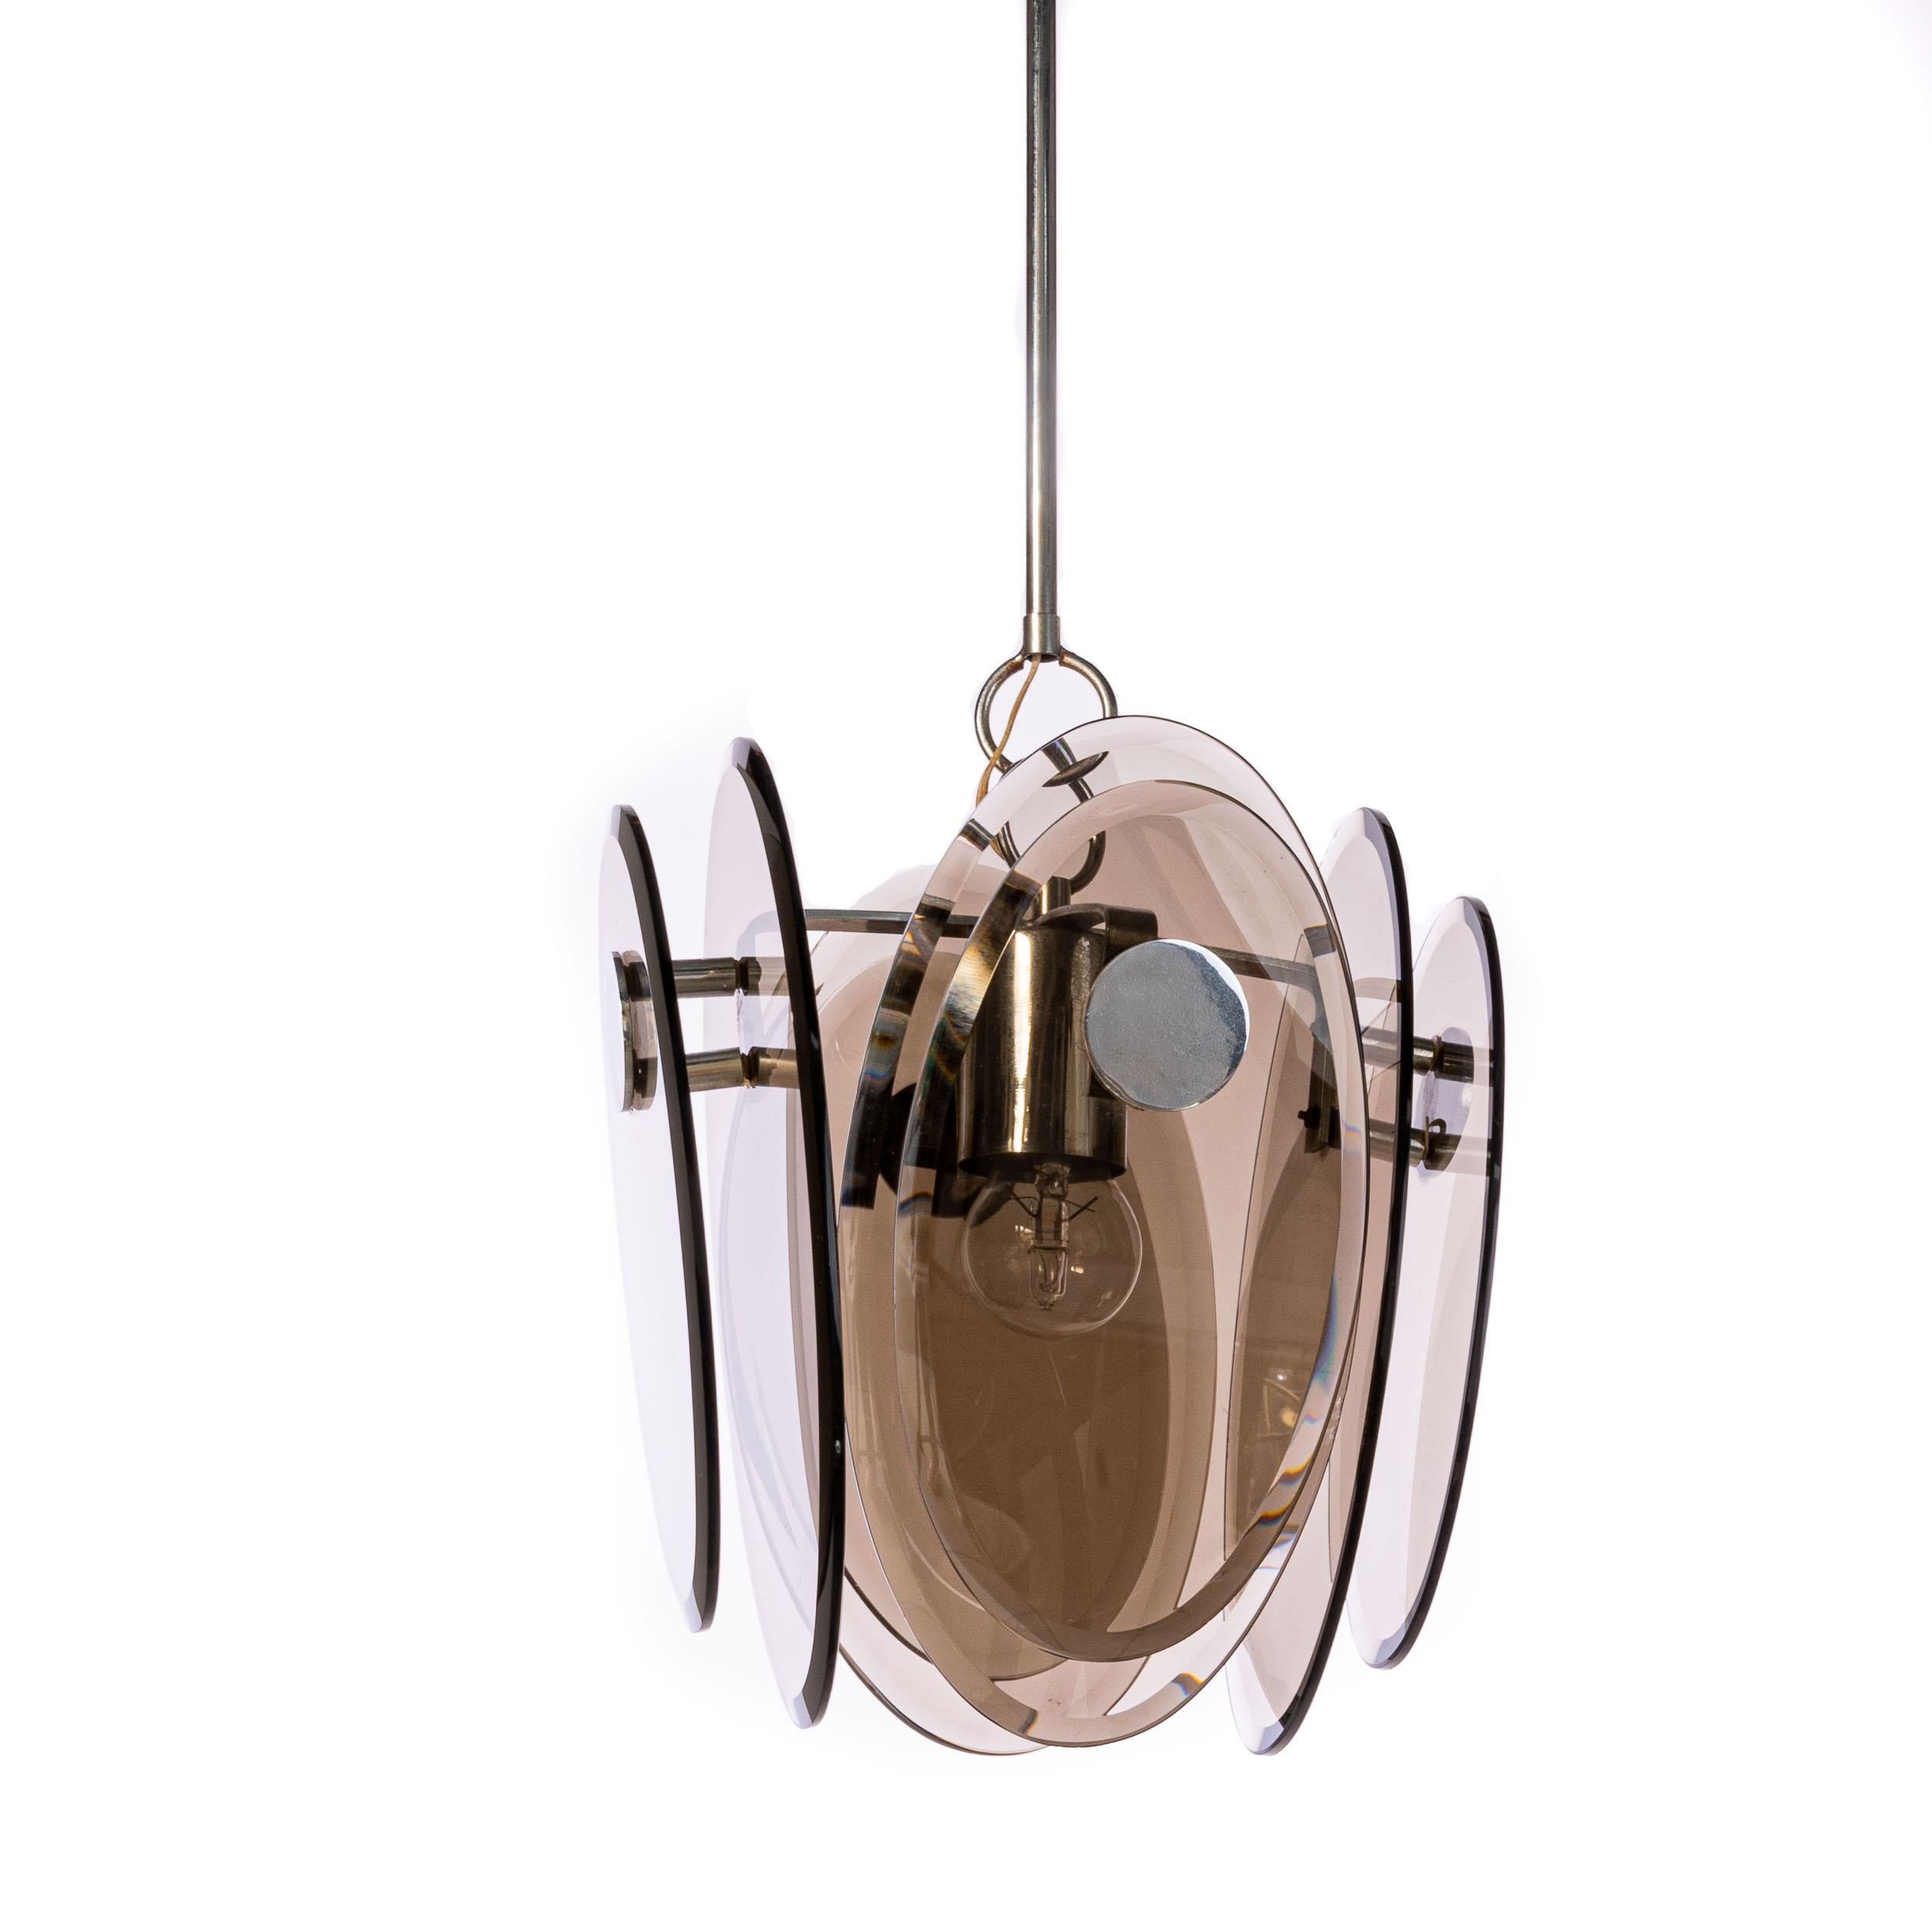 This stylish pendant holds one E27 lightbulb and leaves great reflections in the room. It has 8 glass blades attached to the chrome centre, at each end 2 hanging glass plates one larger than the other. Total 8 plates of brown/gray color. Small chip